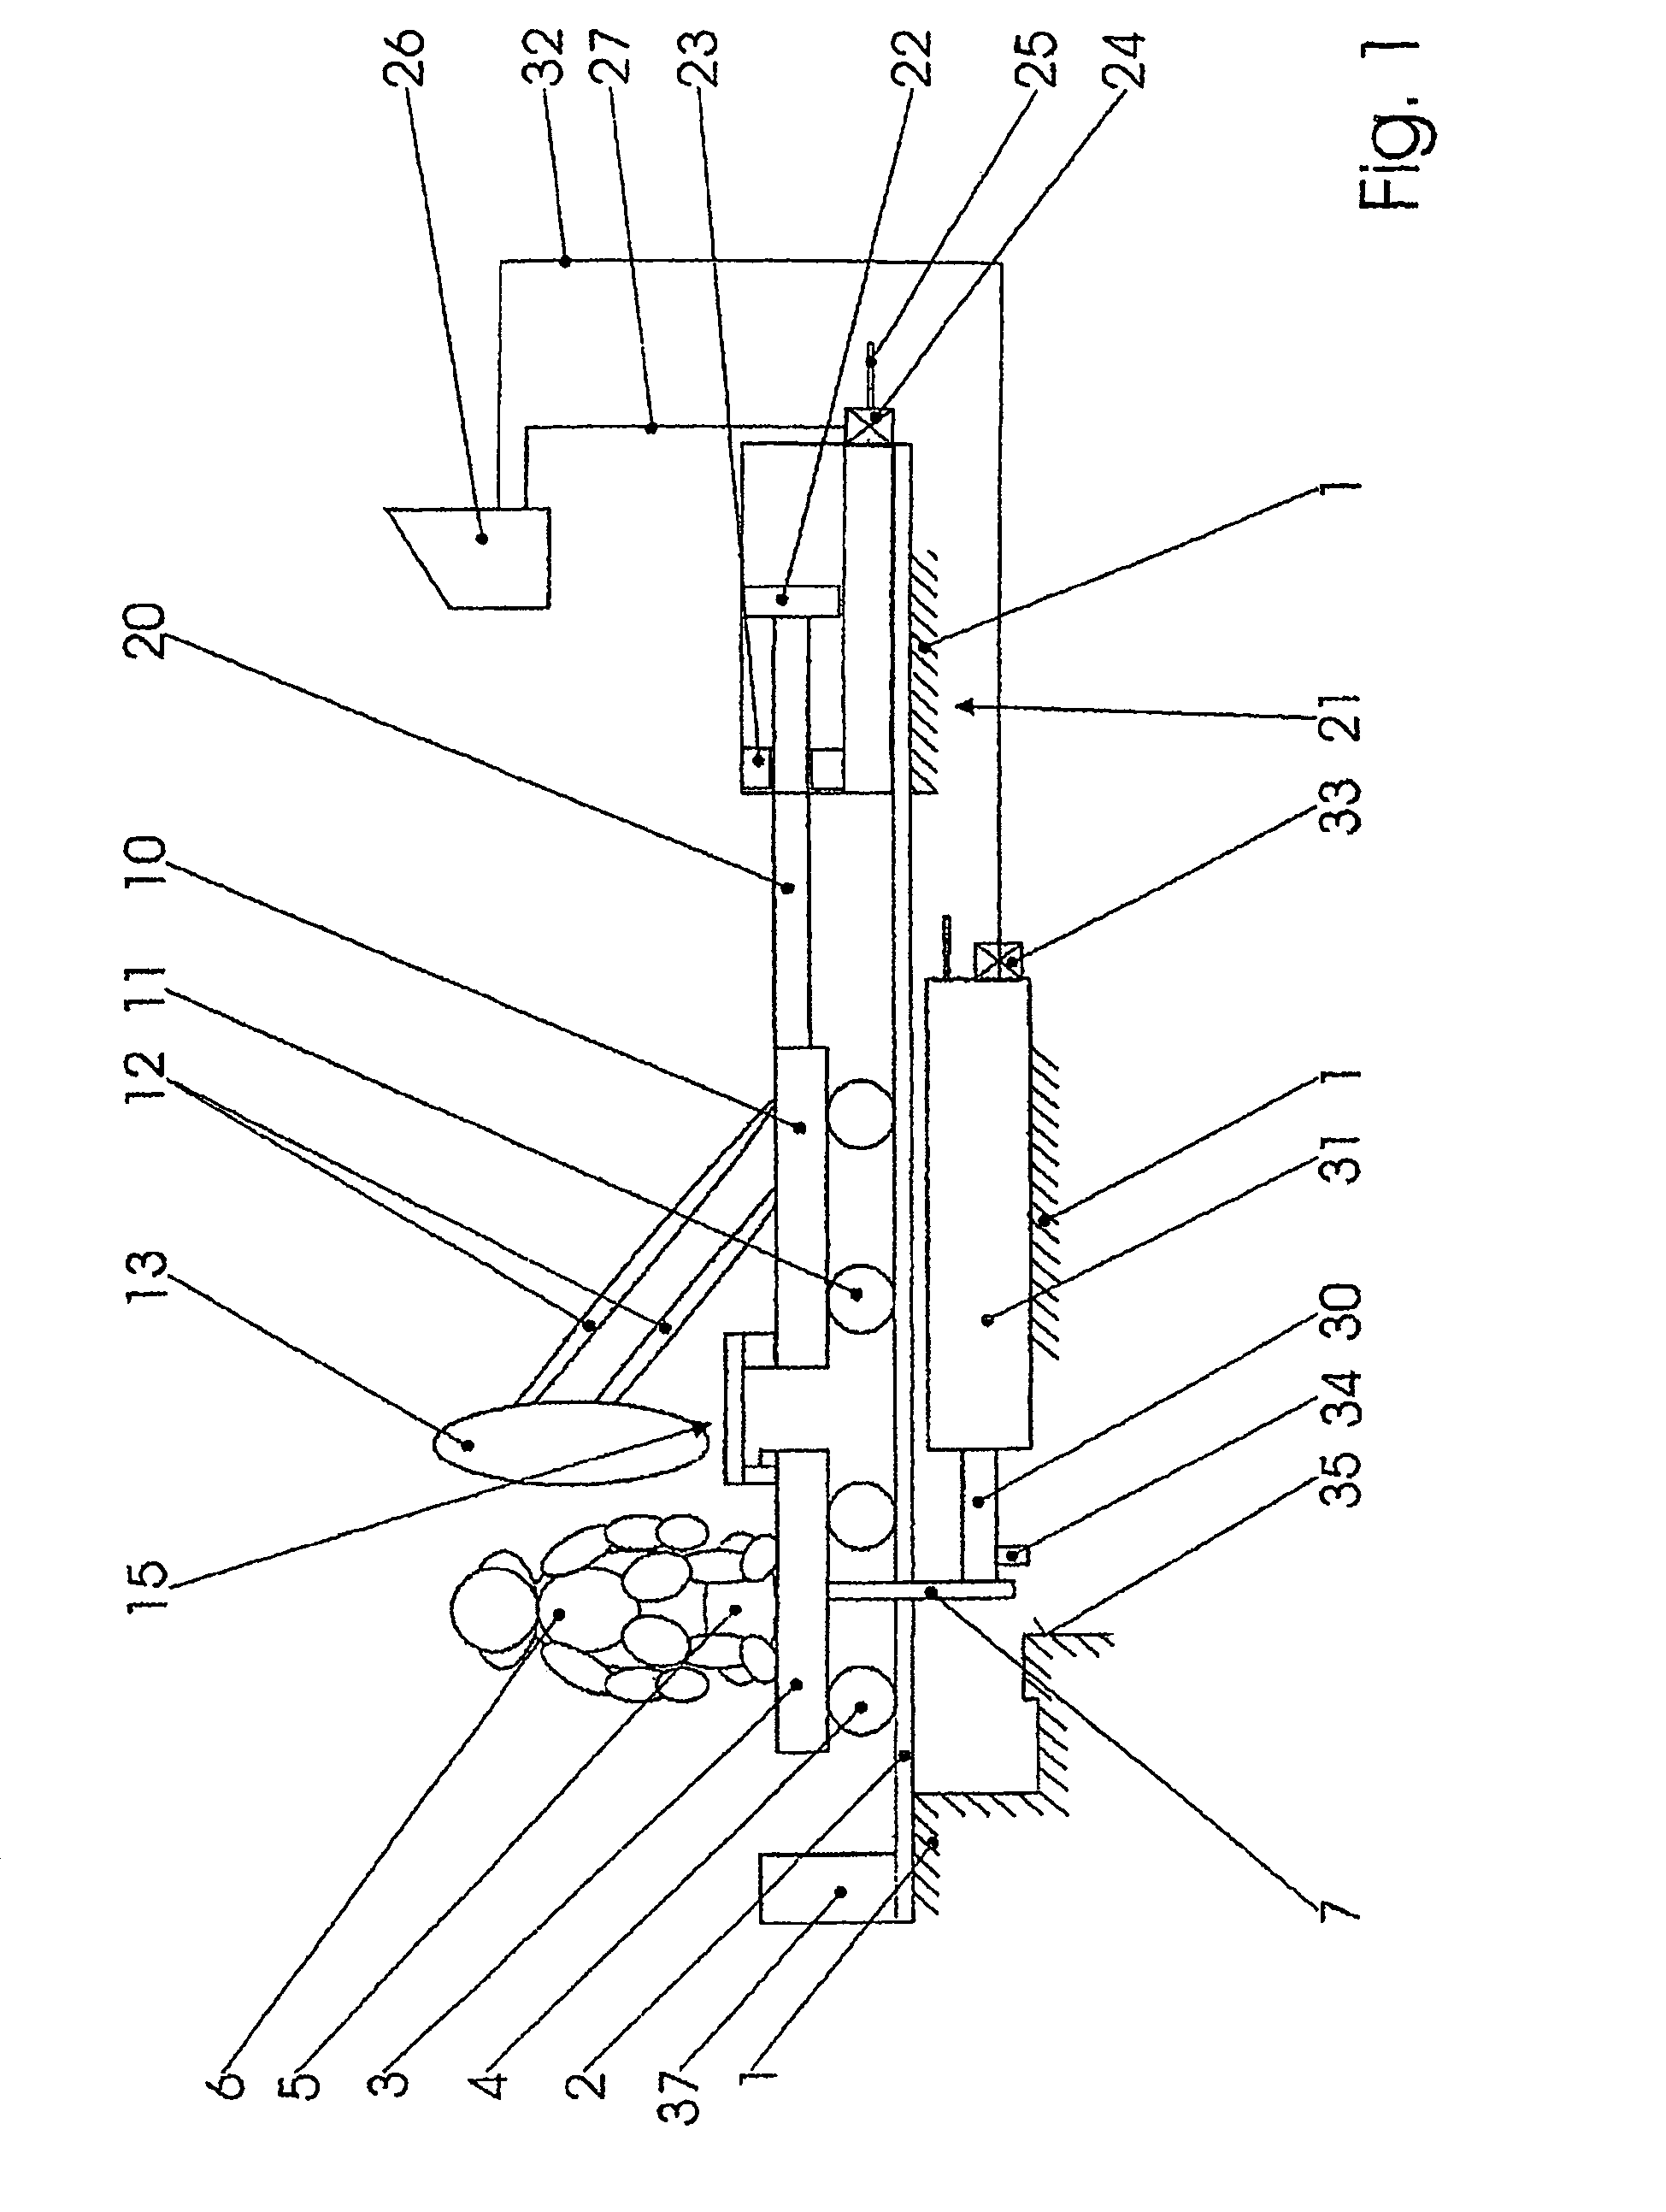 Device for simulating a side collision of a motor vehicle